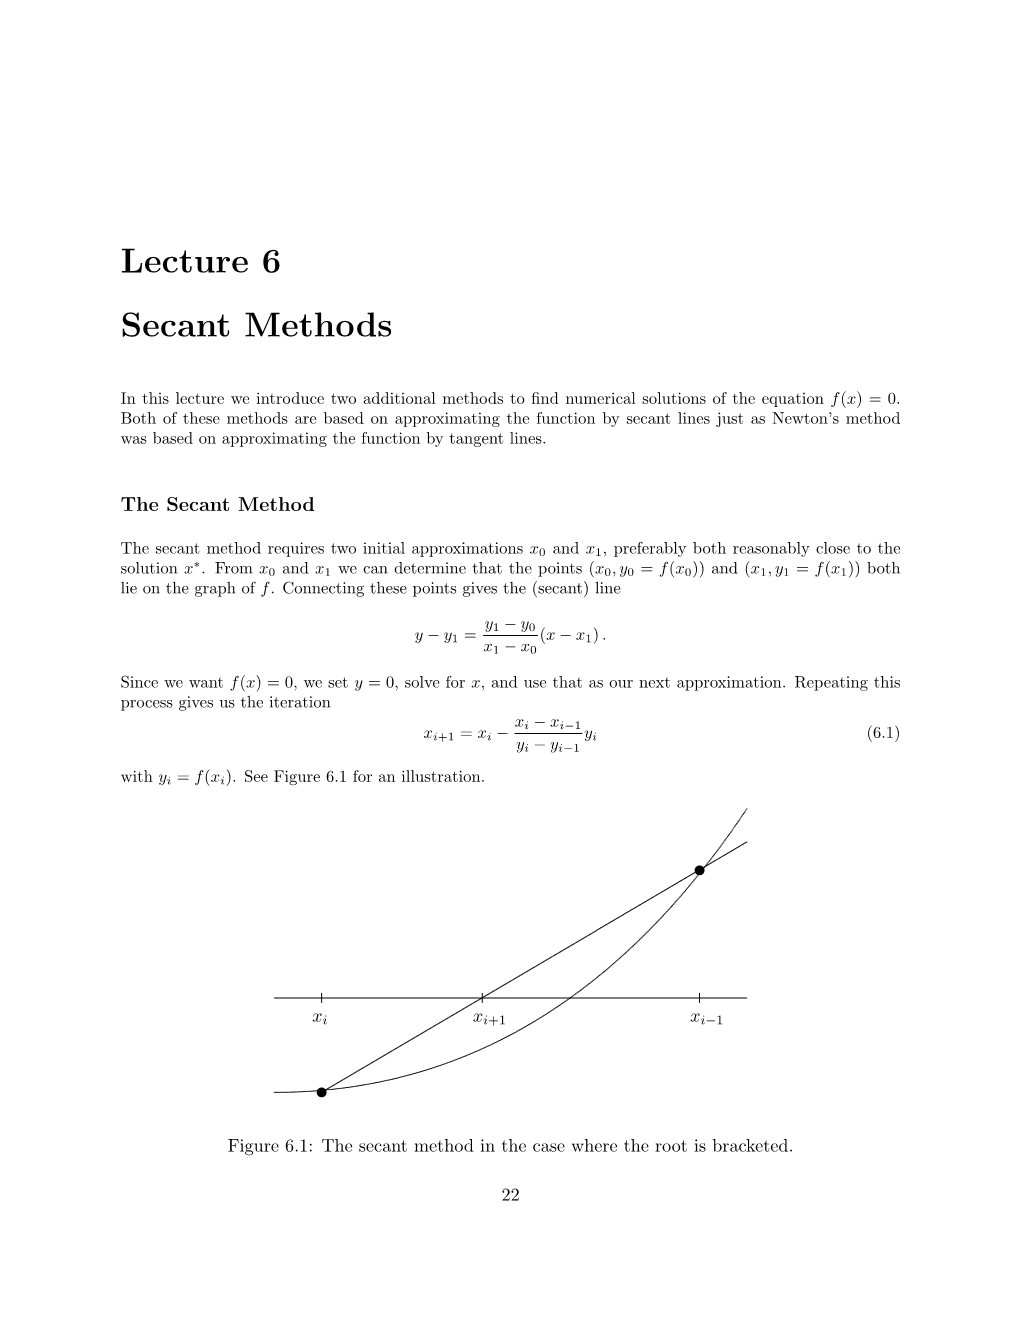 Lecture 6 Secant Methods